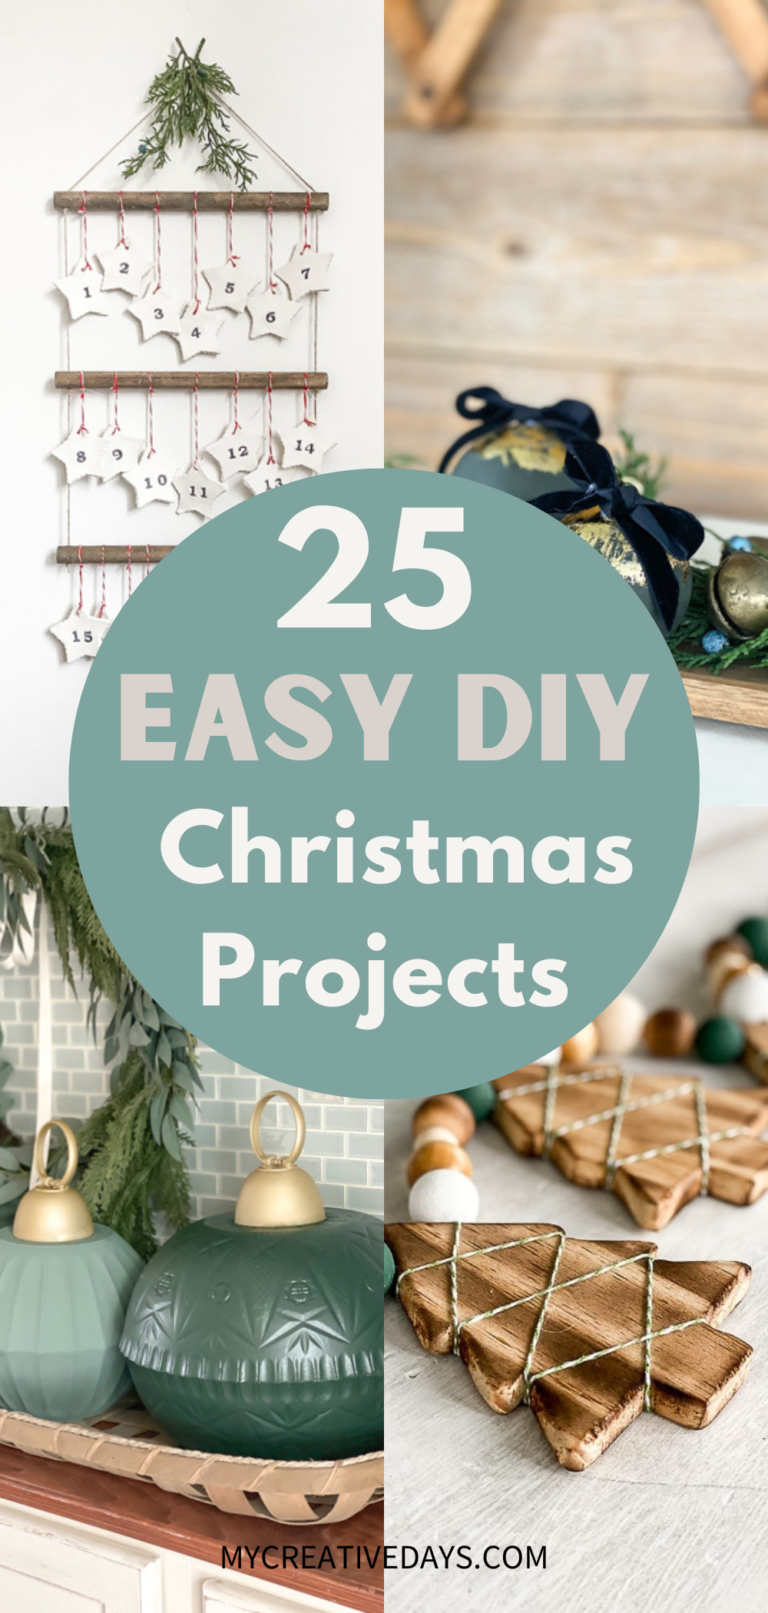 25 DIY Christmas Projects You Can Create Easily - My Creative Days